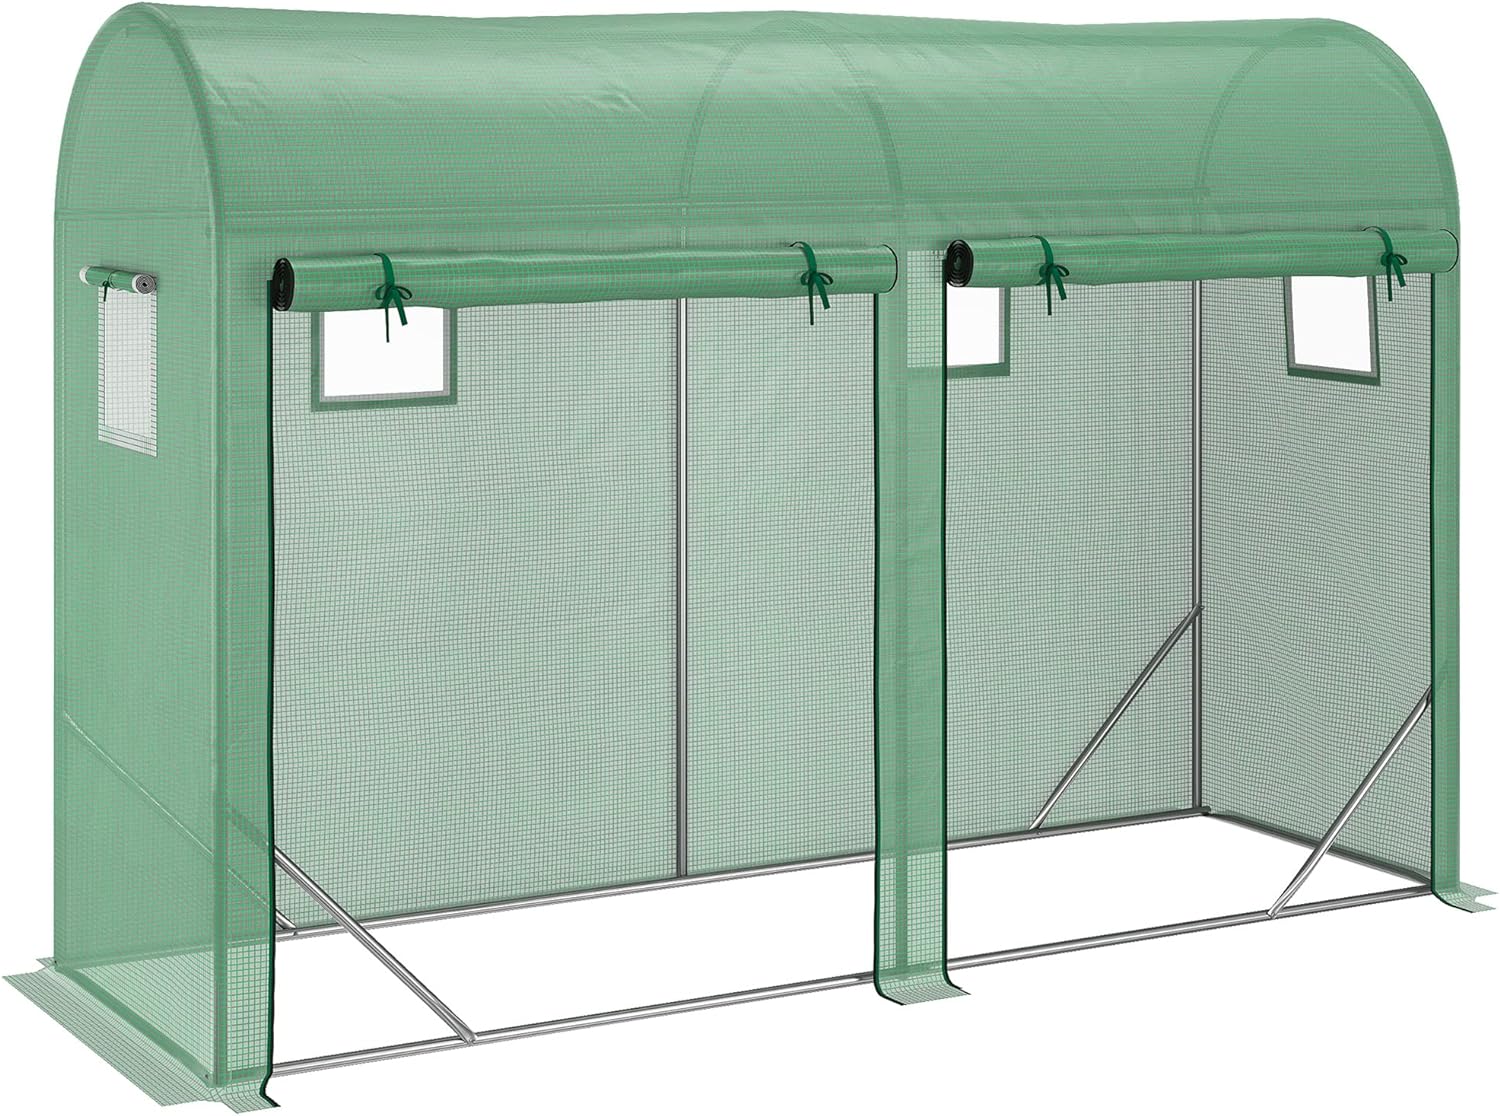 Outsunny 10 x 3 x 7 Tunnel Greenhouse Outdoor Walk-in Hot House with Roll-up Windows and Zippered Door, Steel Frame, PE Cover, Green : Amazon.ca: Patio, Lawn  Garden